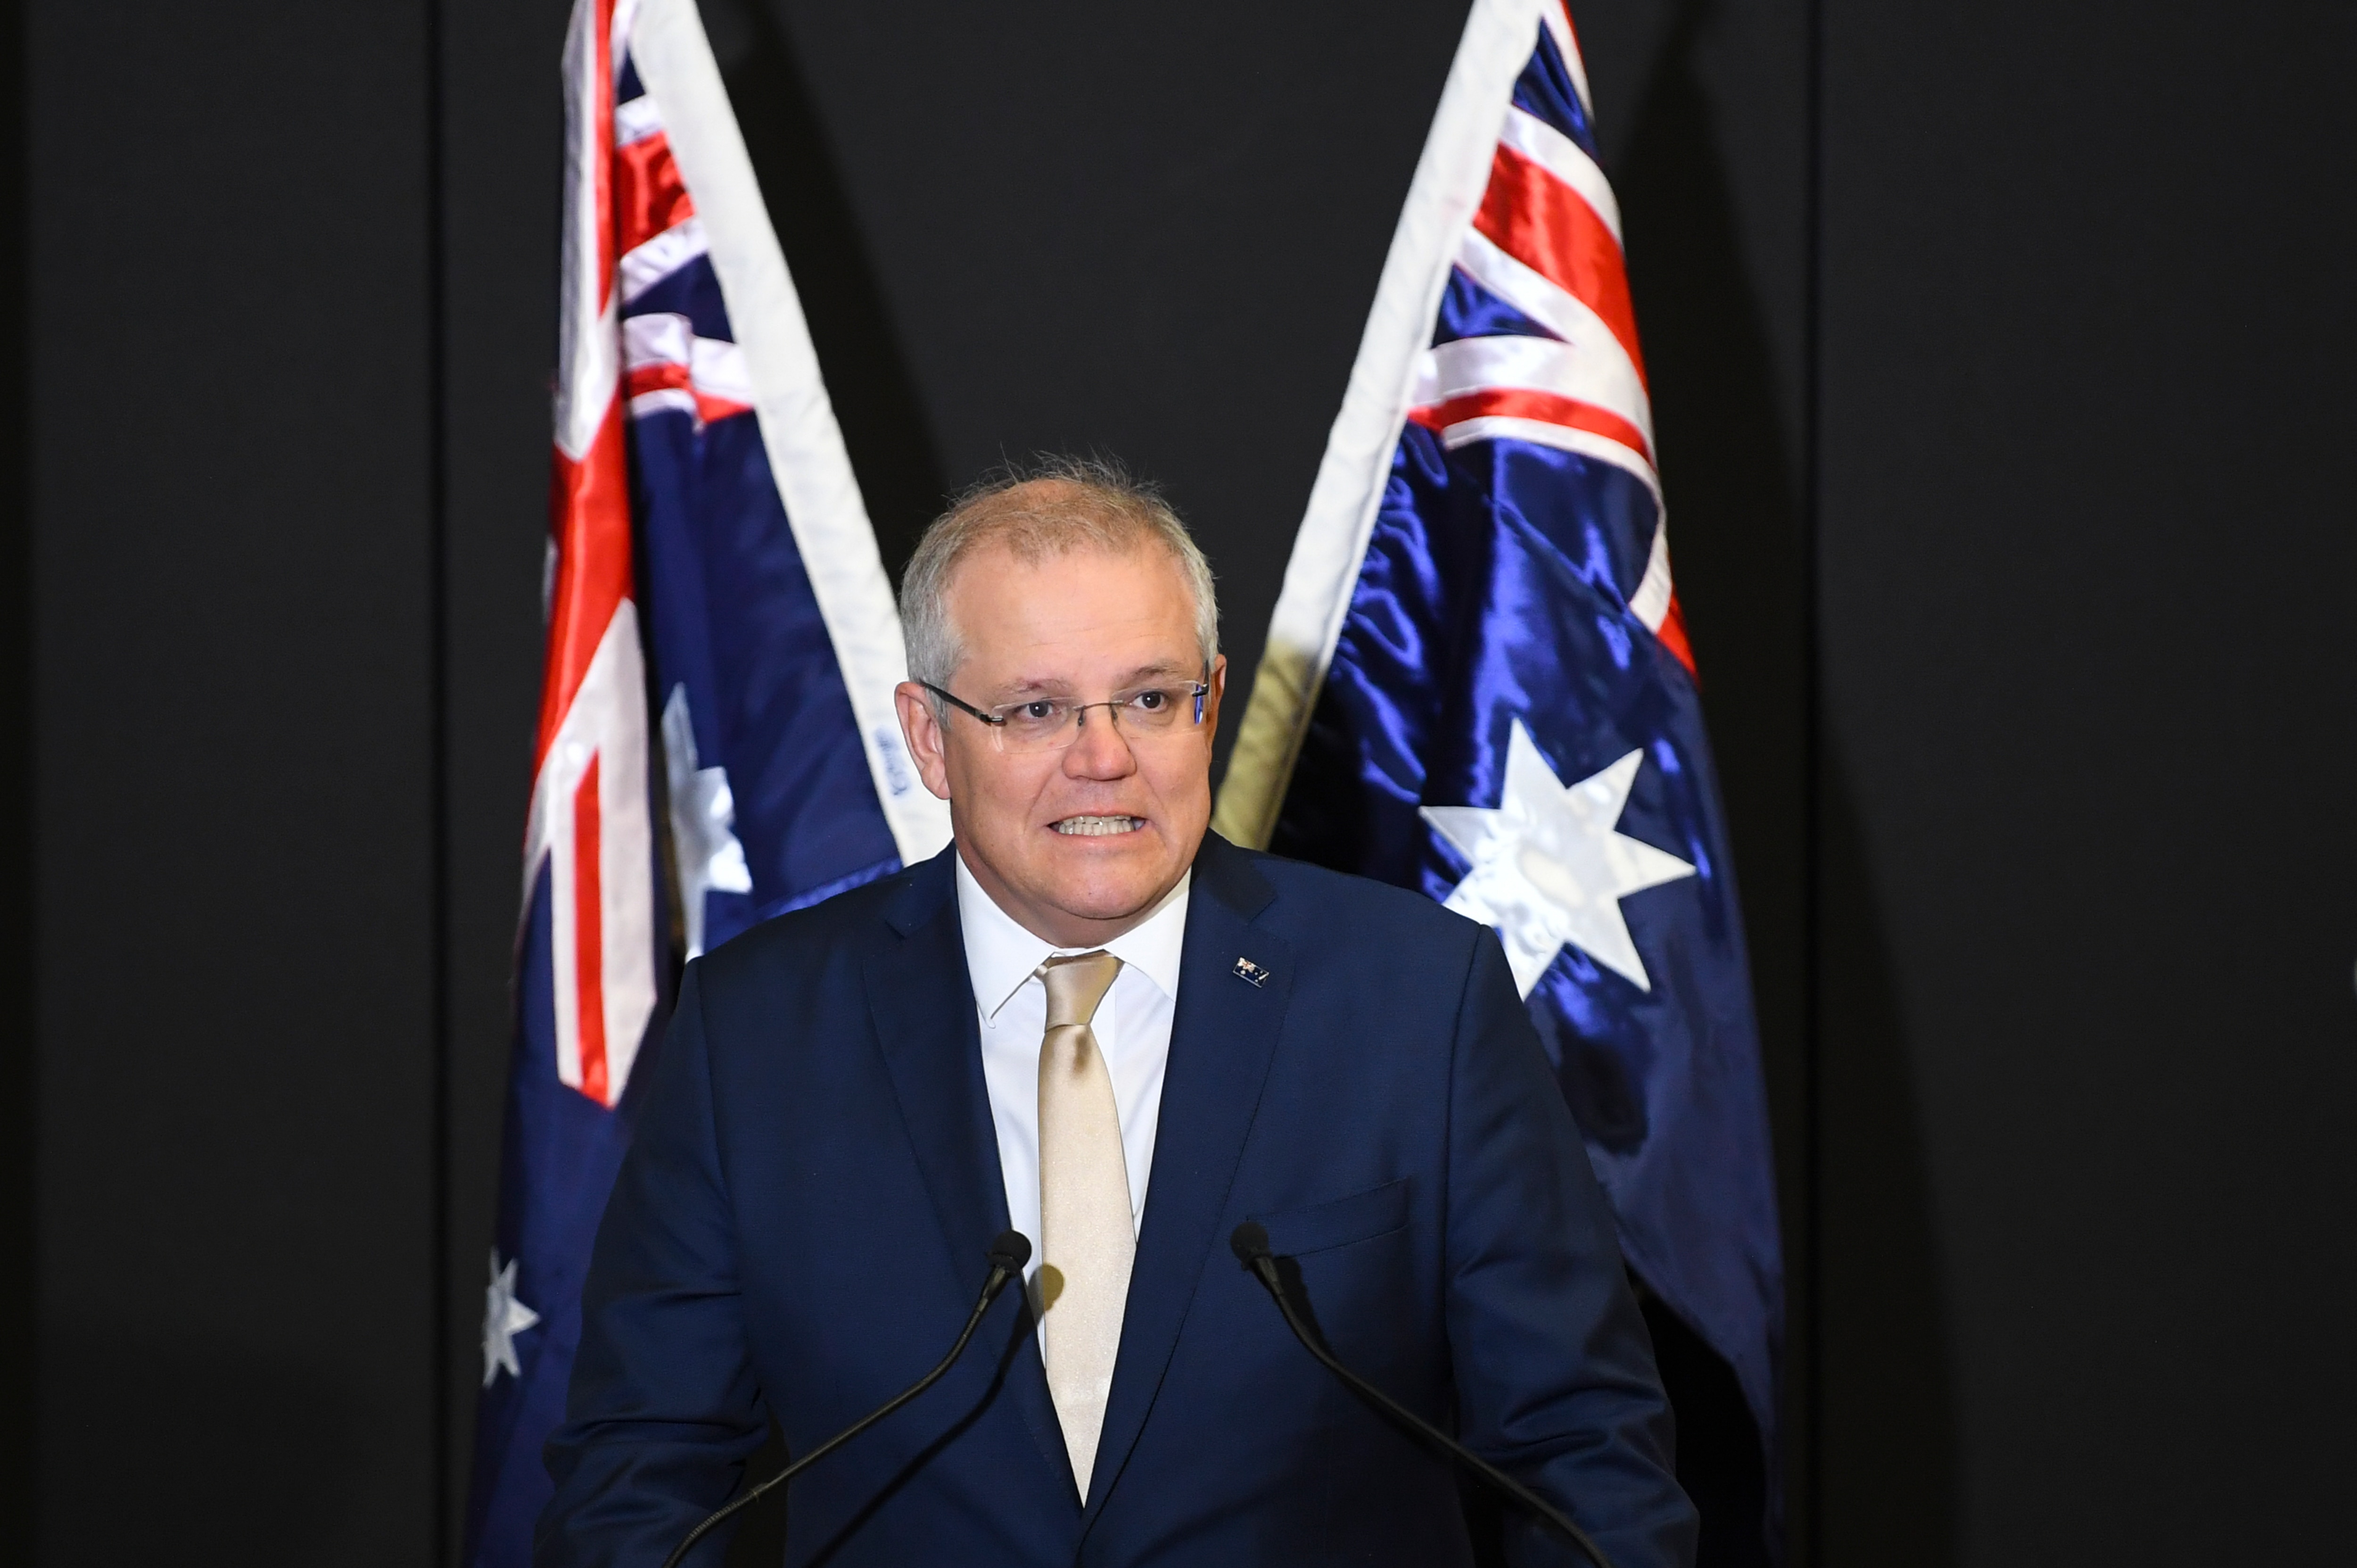 Prime Minister Scott Morrison at the Australian Defence Force Academy in Canberra.